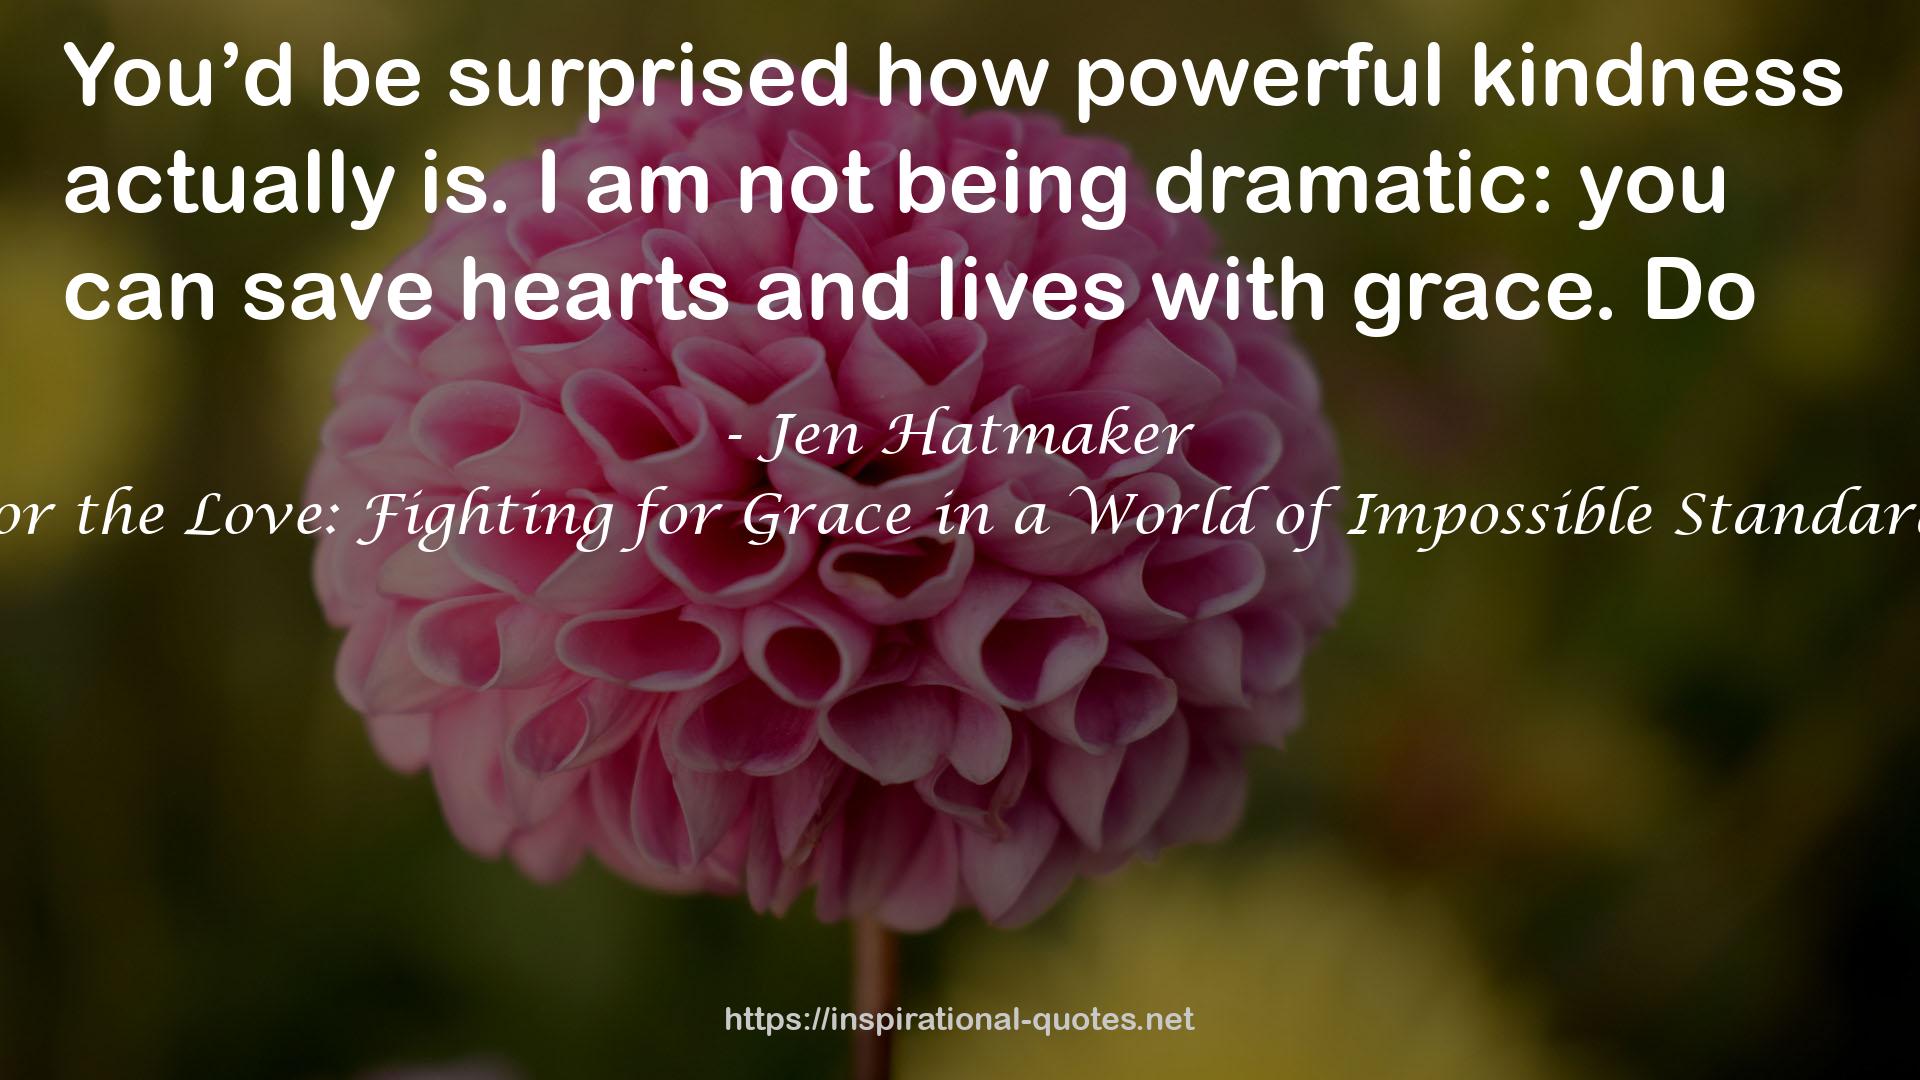 For the Love: Fighting for Grace in a World of Impossible Standards QUOTES